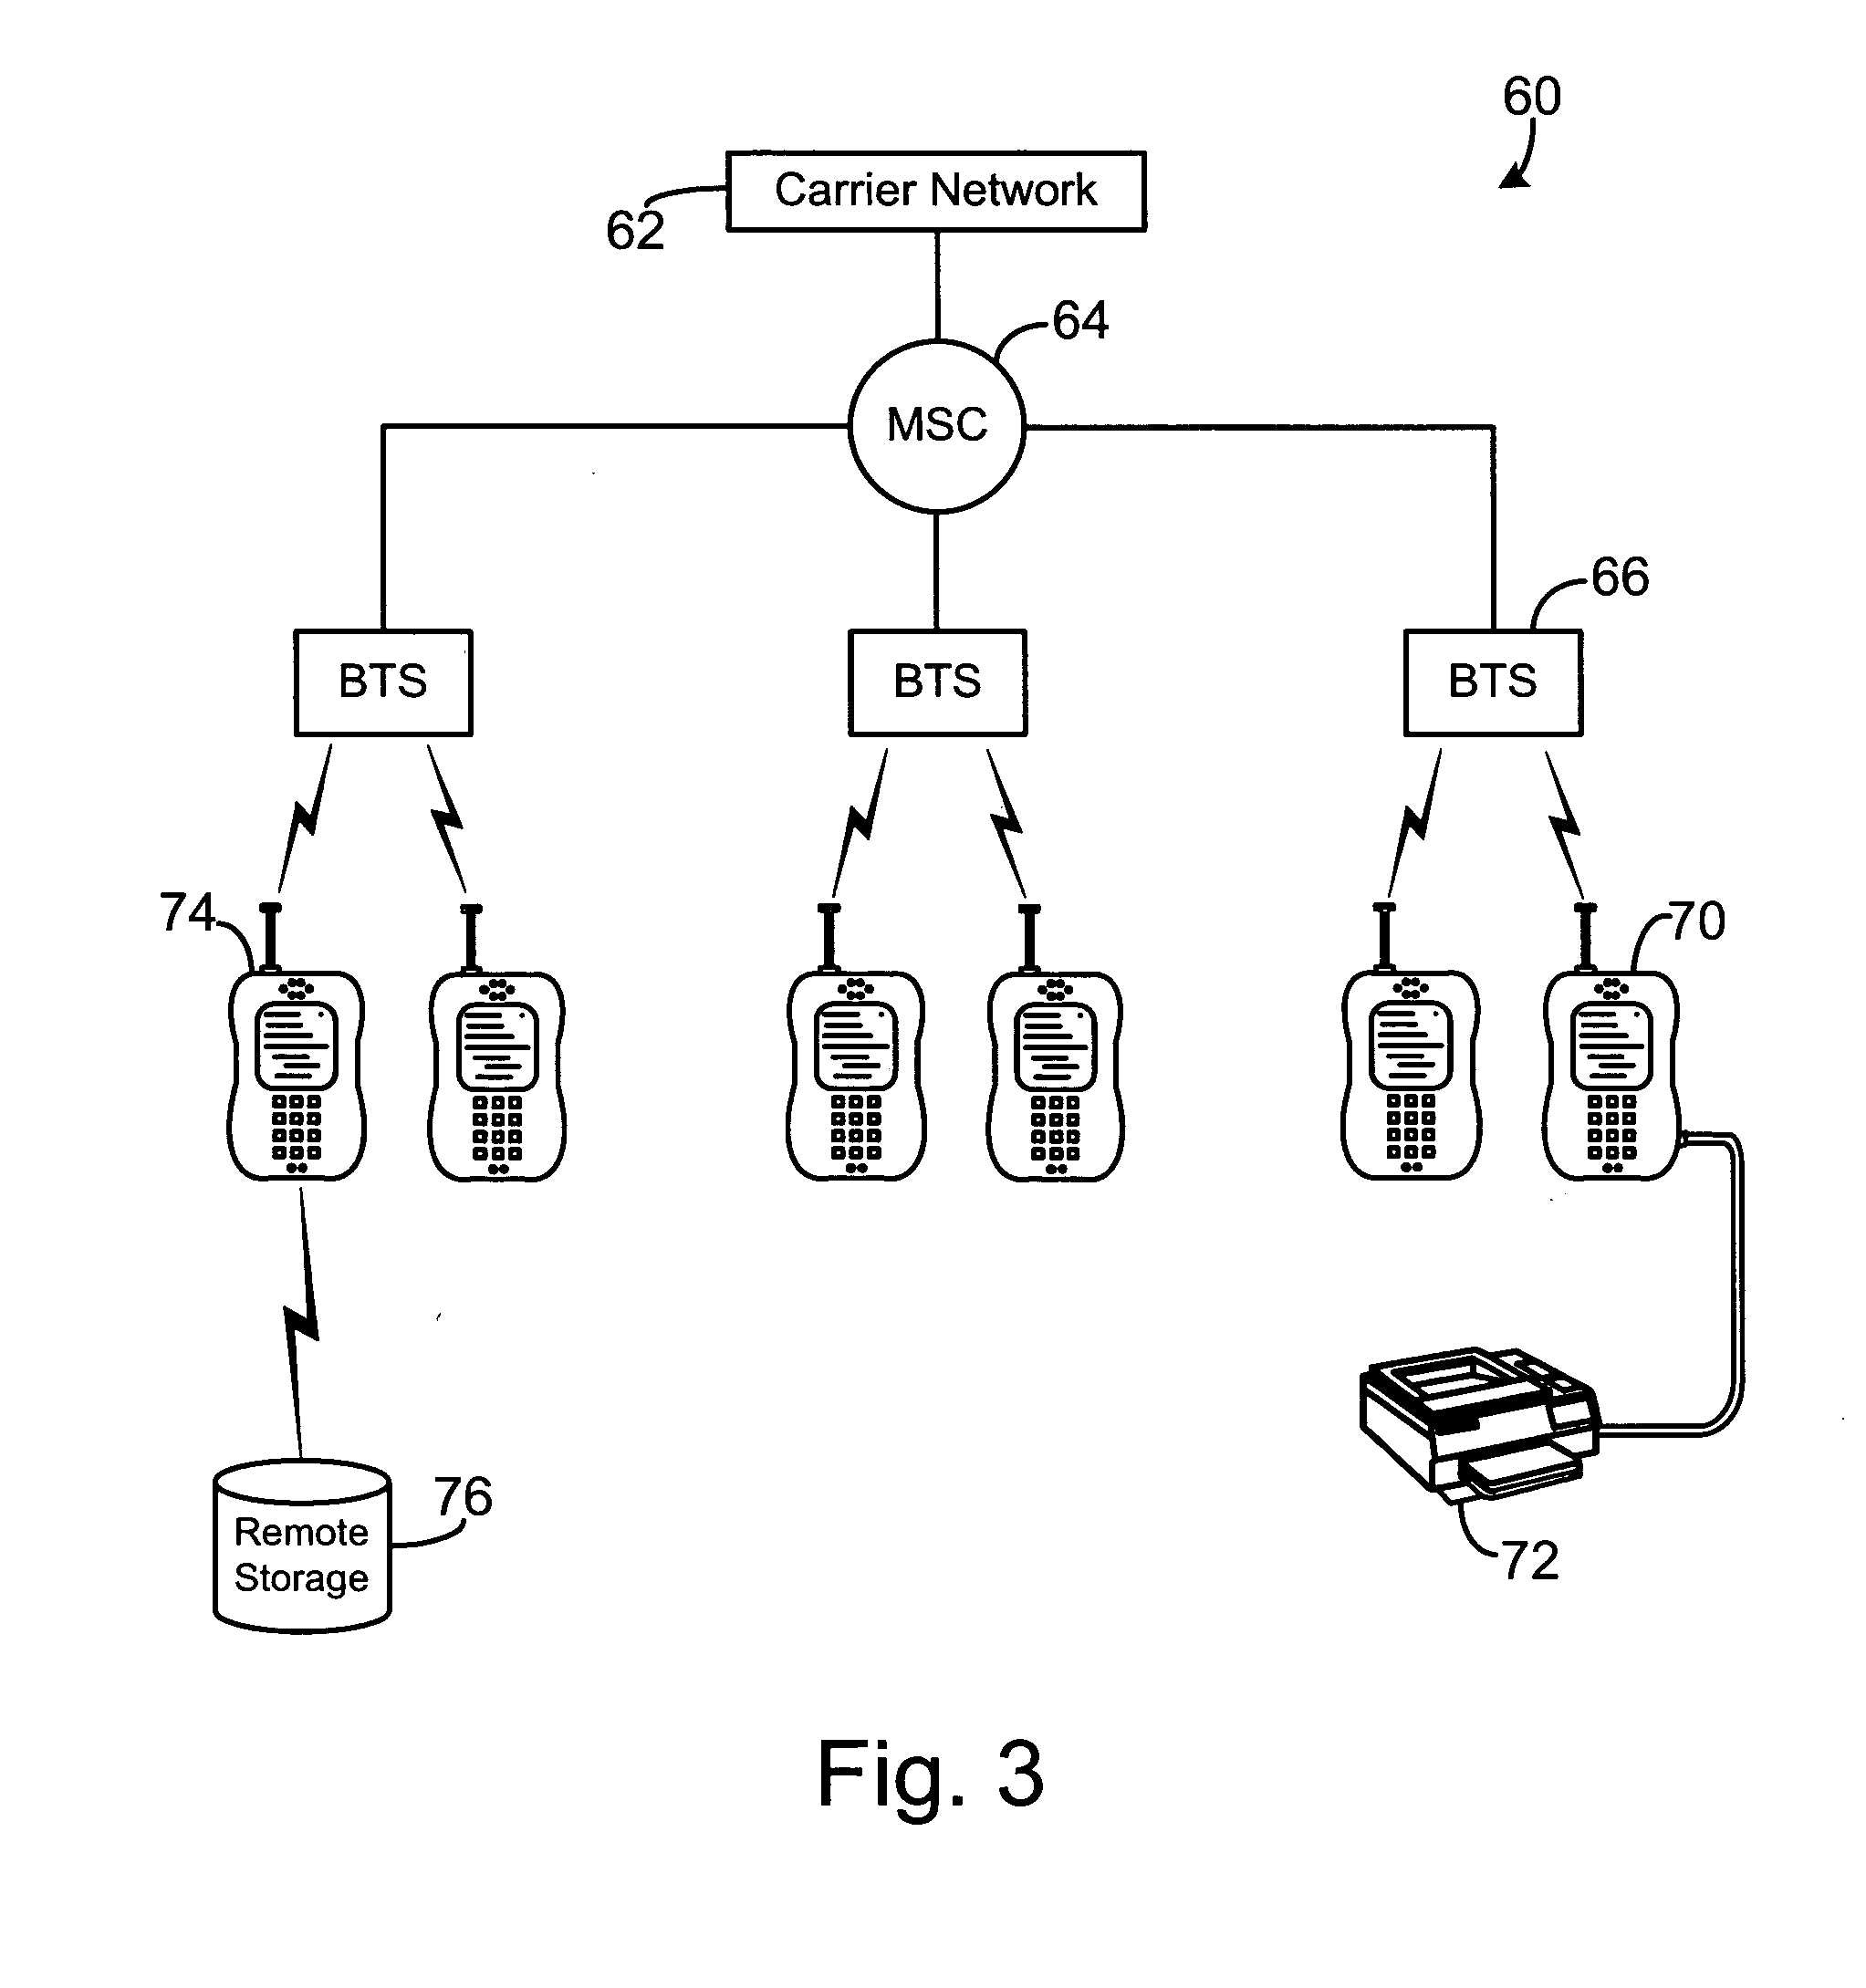 System and method for establishing a communication between a peripheral device and a wireless device